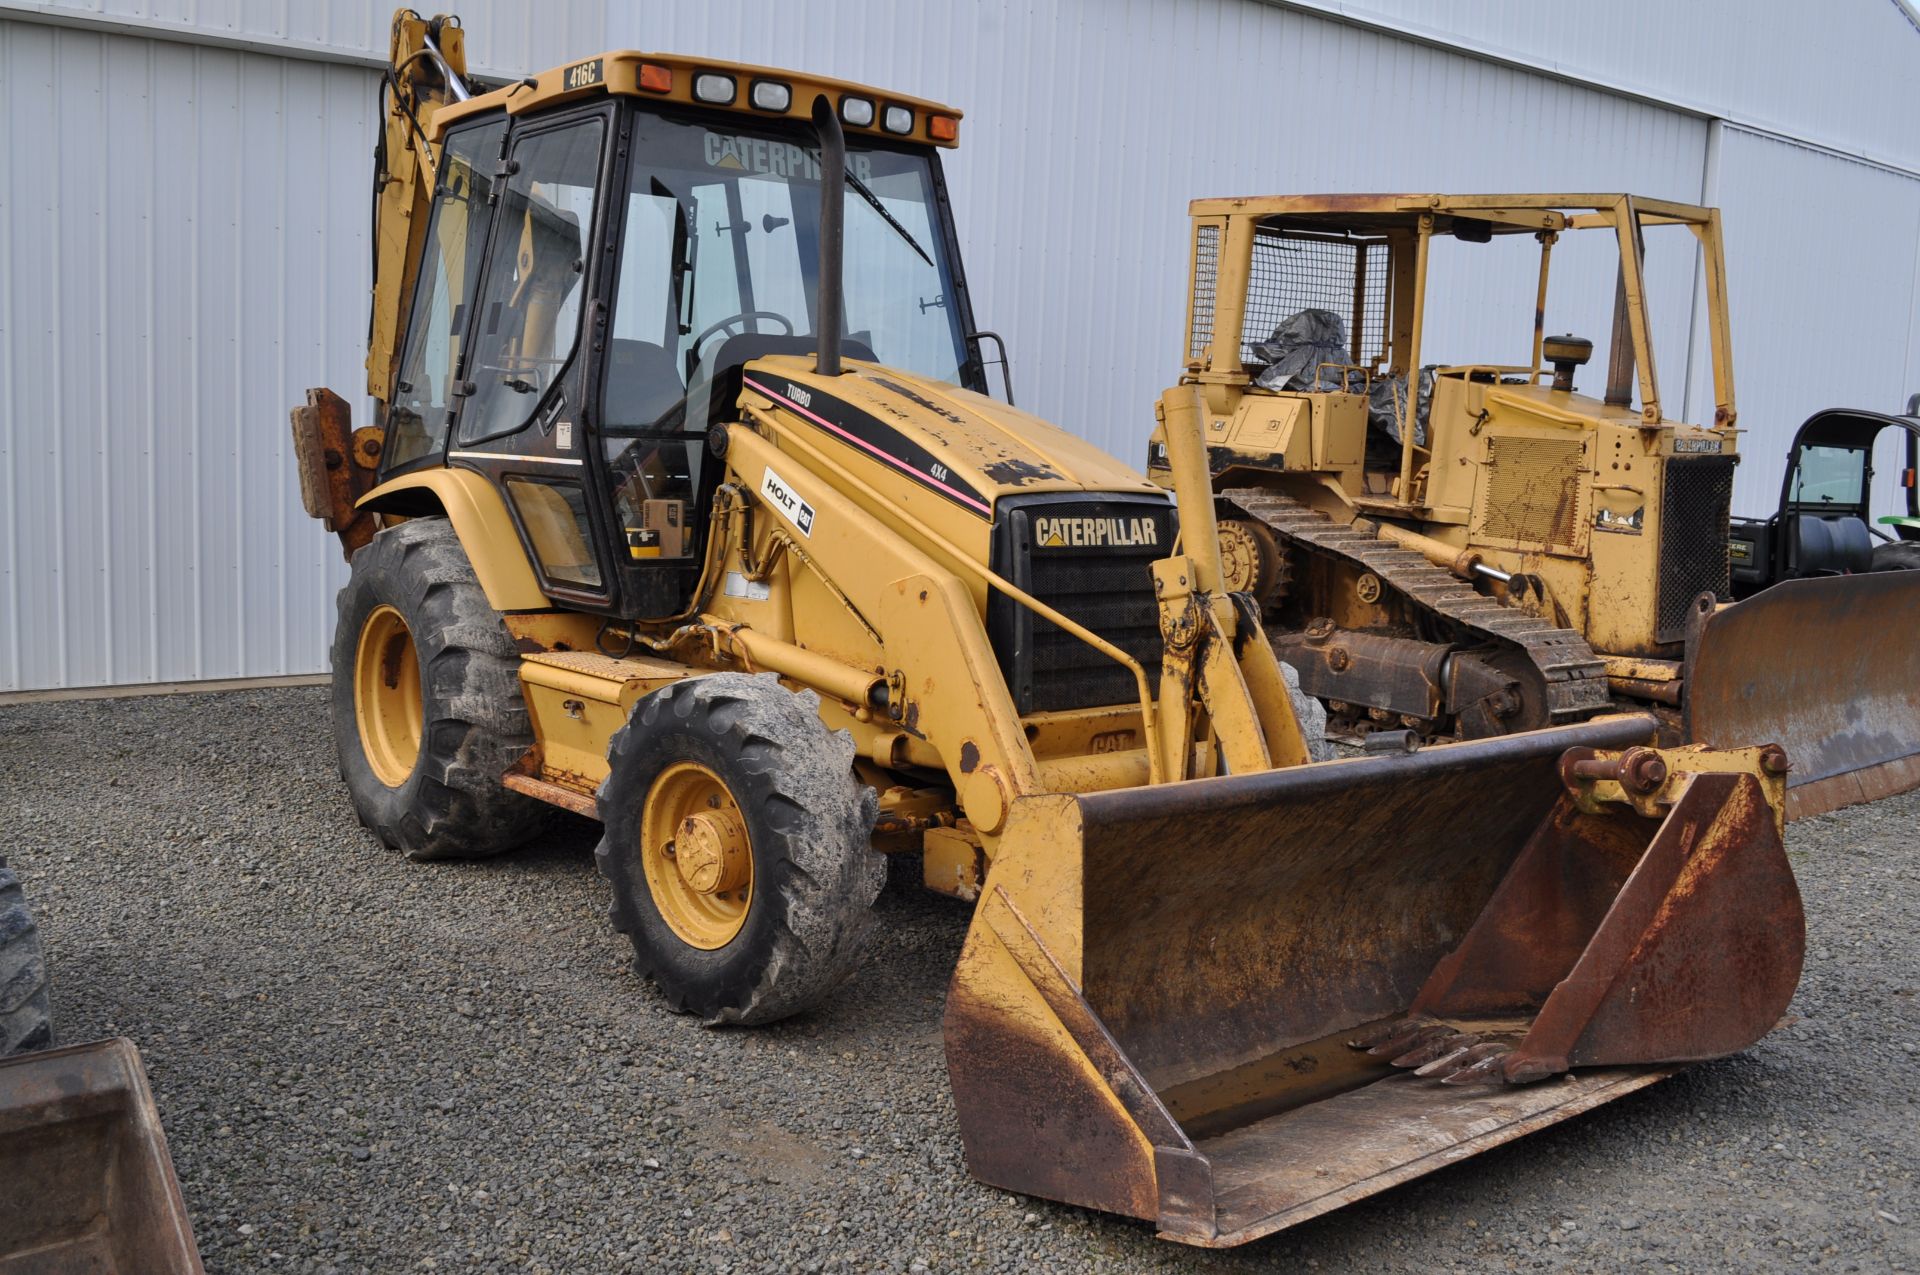 CAT 416C backhoe, 88” bucket, 19.5-24 rear, 12.5/80-18 front, 4x4, 18” and 24” digging buckets - Image 2 of 35